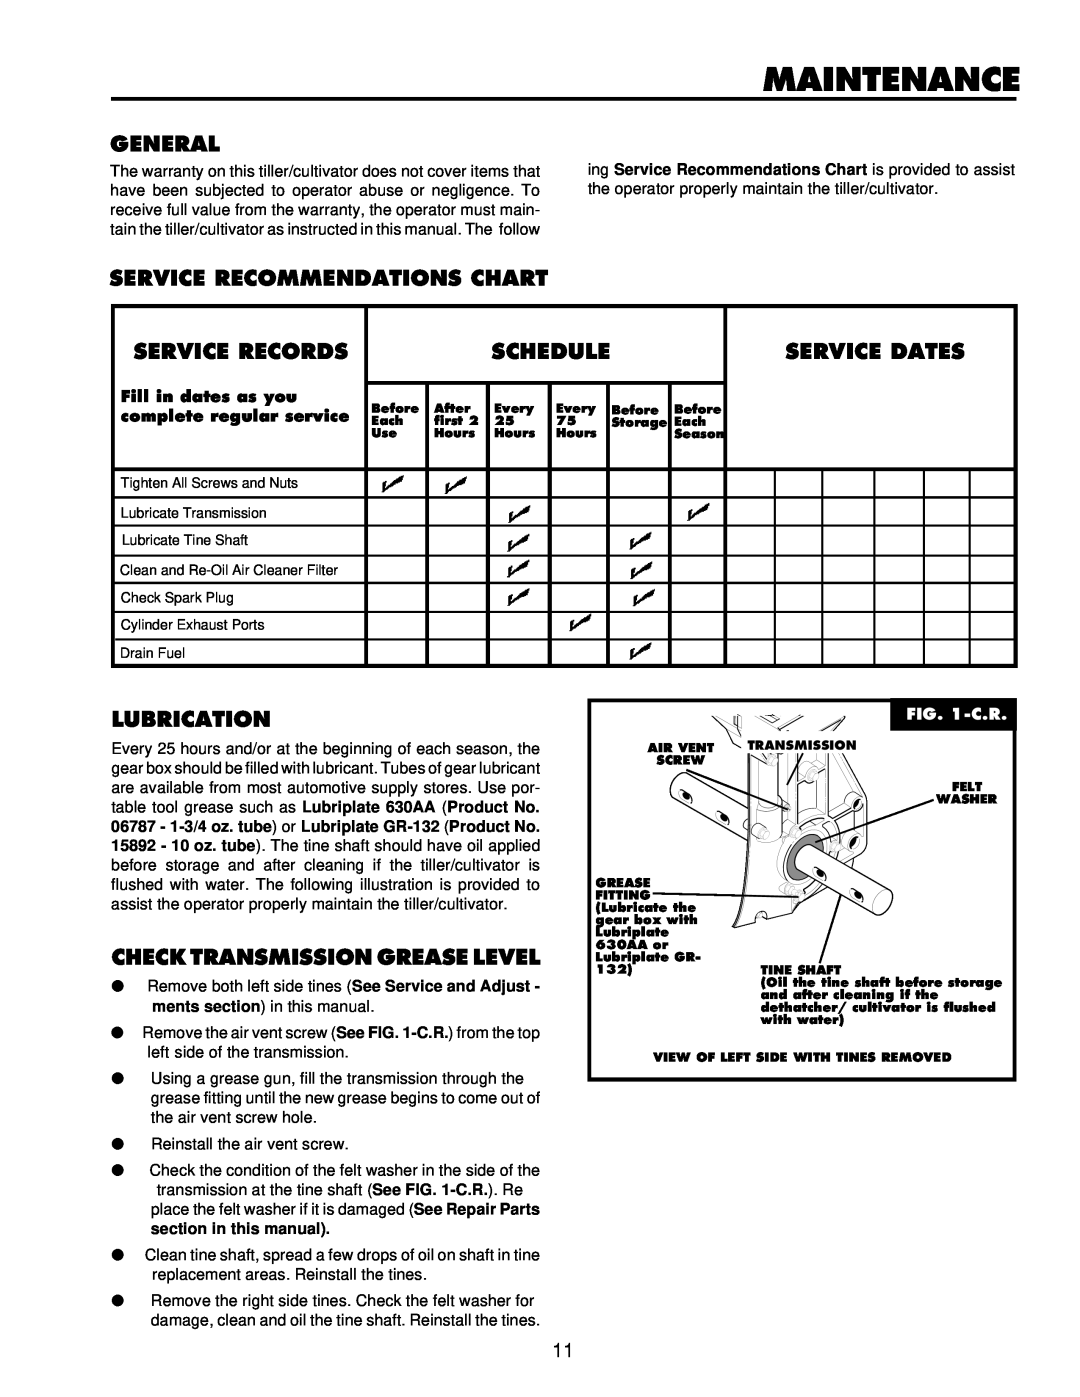 Husqvarna CT16 Maintenance, General, Service Recommendations Chart, Service Records, Schedule, Service Dates, Lubrication 